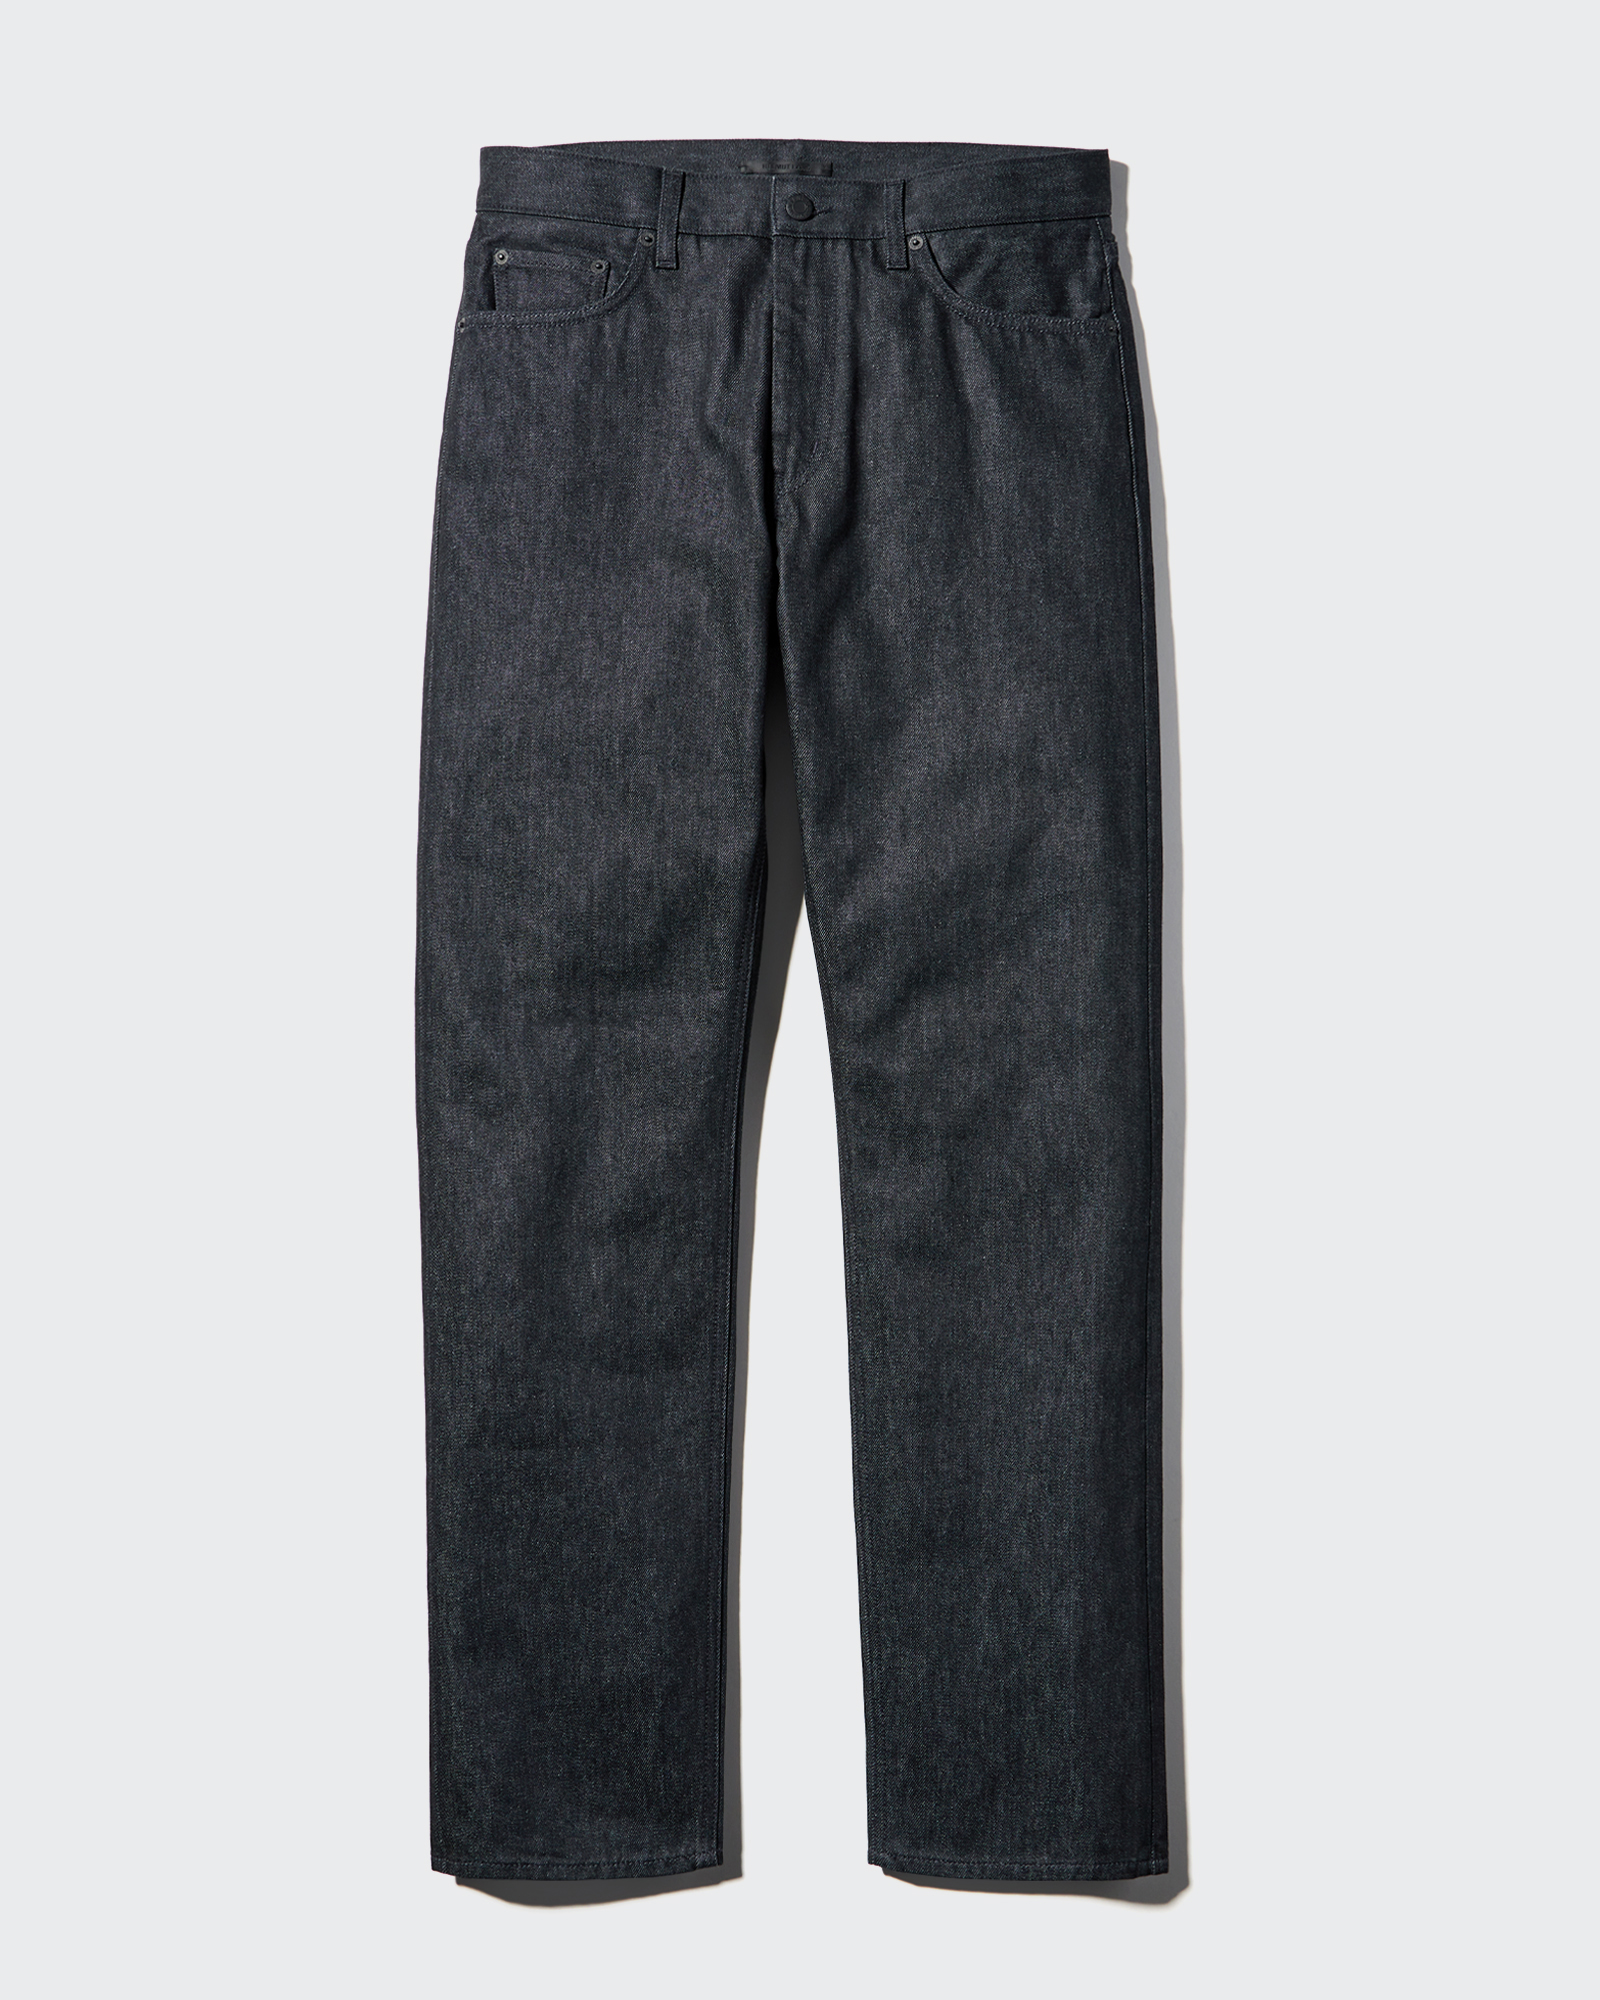 UNIQLO and HELMUT LANG Classic Cut Jeans | MEN | Theory